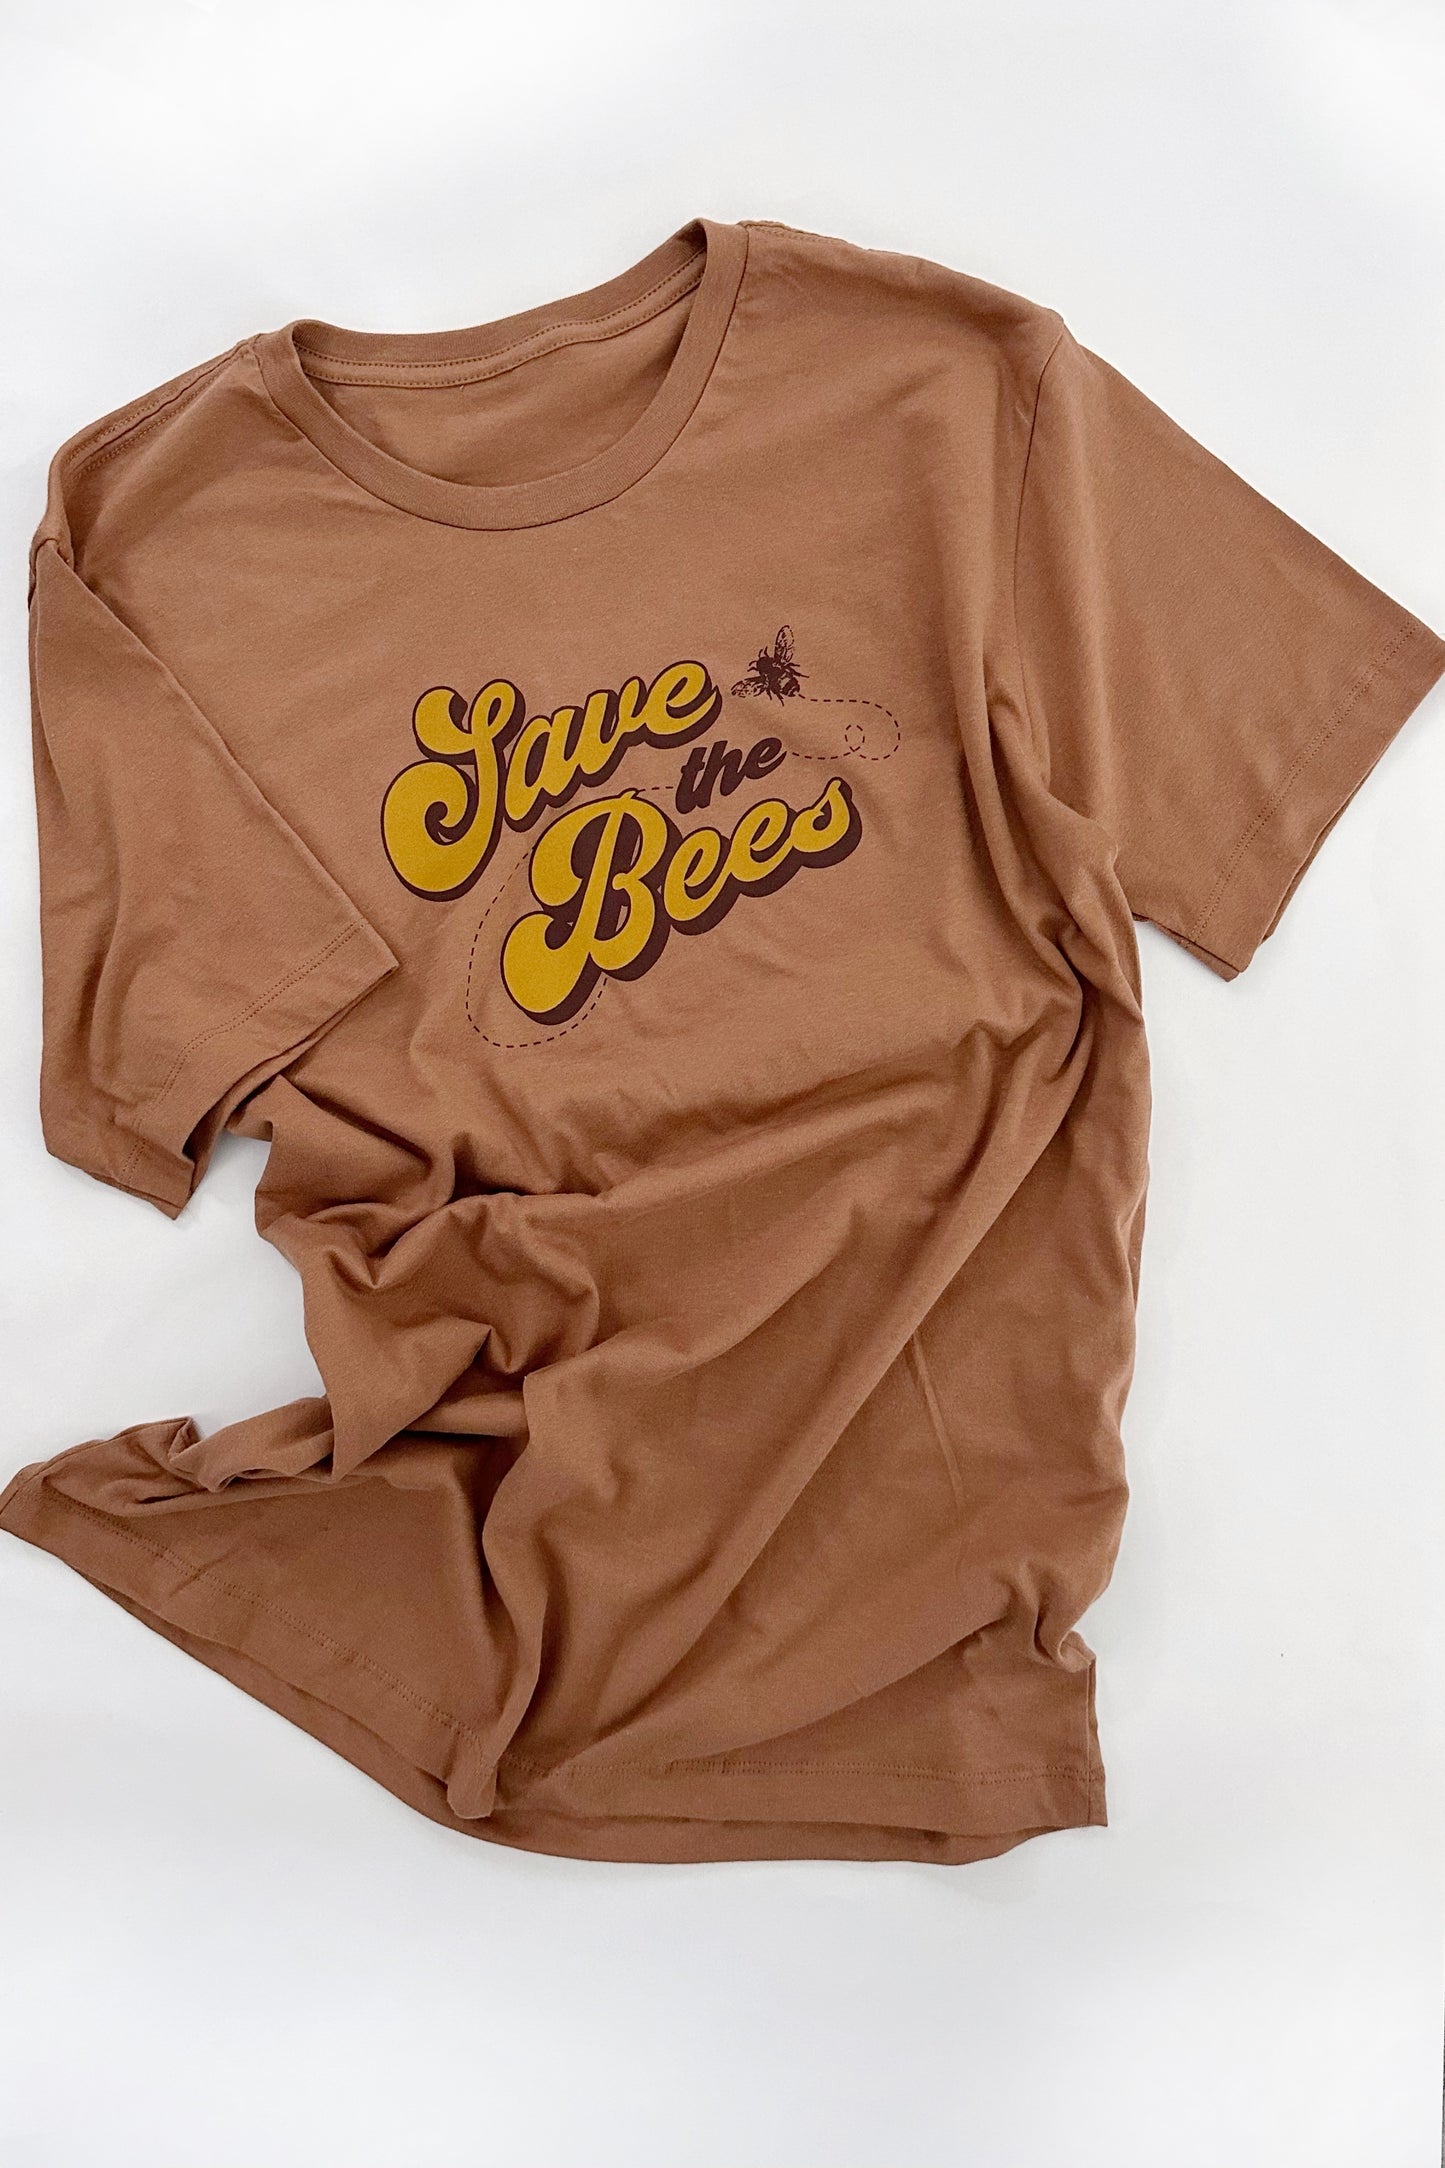 Save the Bees T-shirt